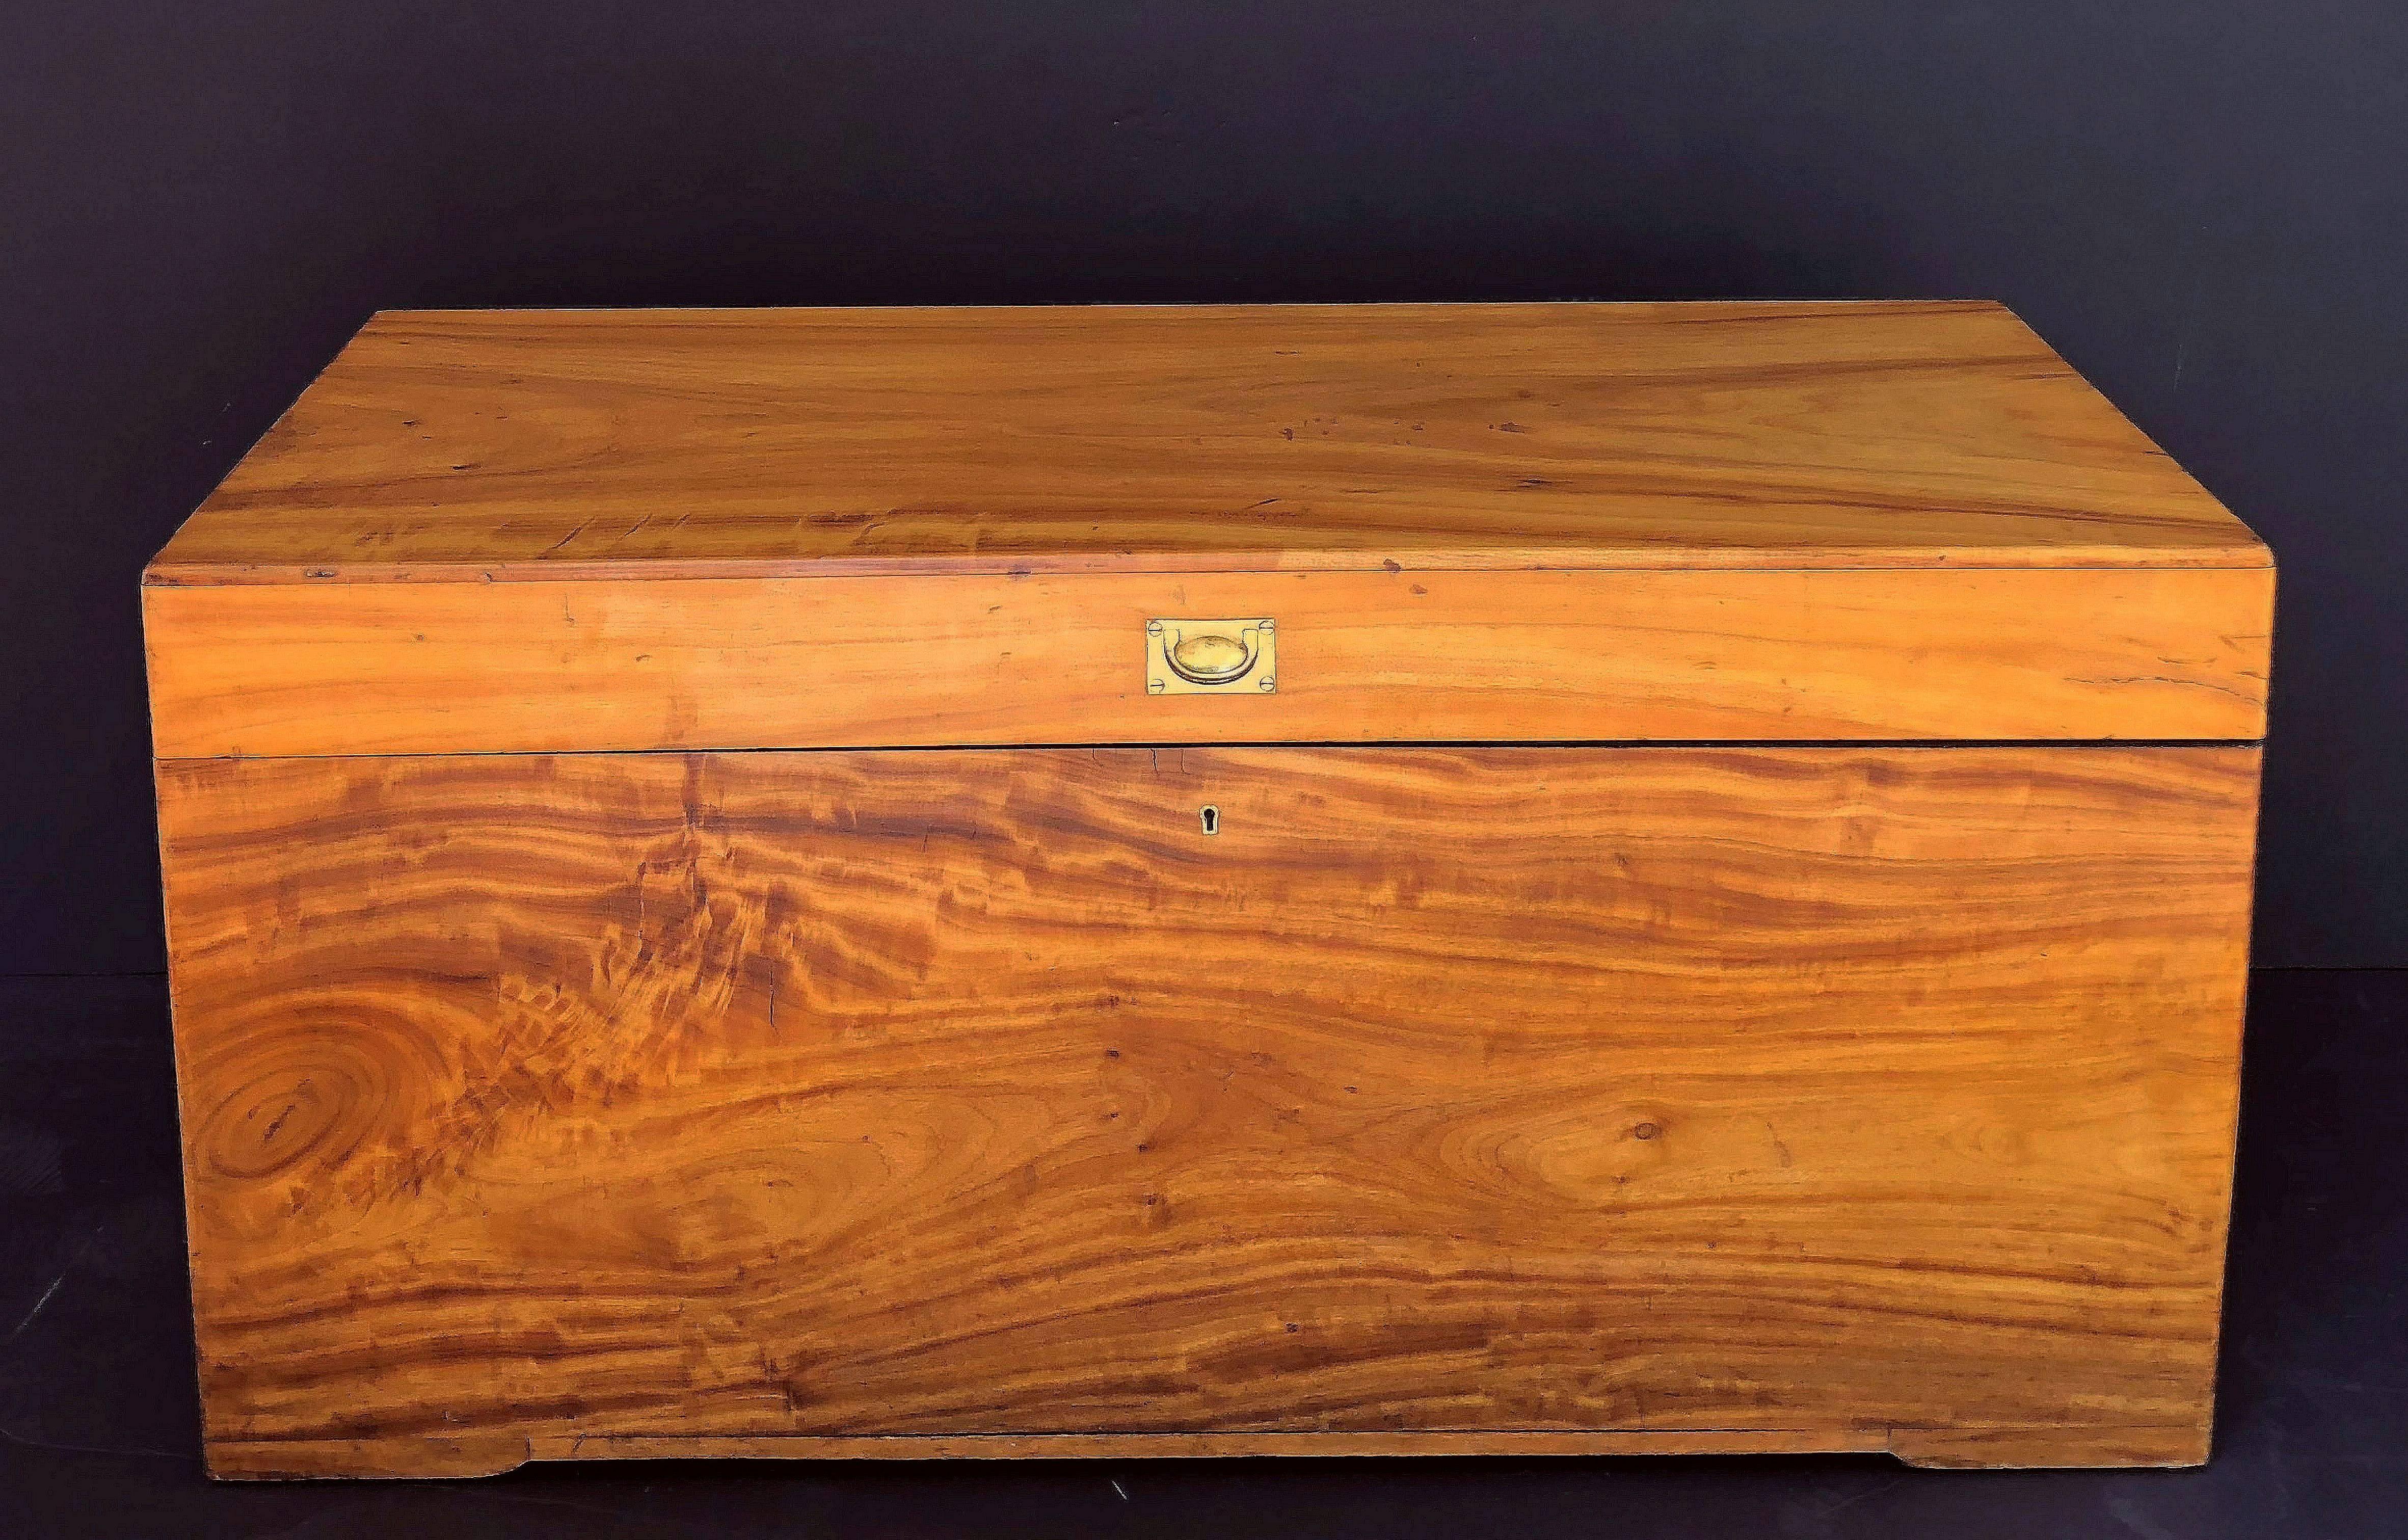 A handsome large British officer's rectangular trunk or chest (coffer) of camphor wood, manufactured for an officer to carry his kit on campaign. 
With original recessed brass front latch, brass escutcheon, and brass carrying handles to each side.